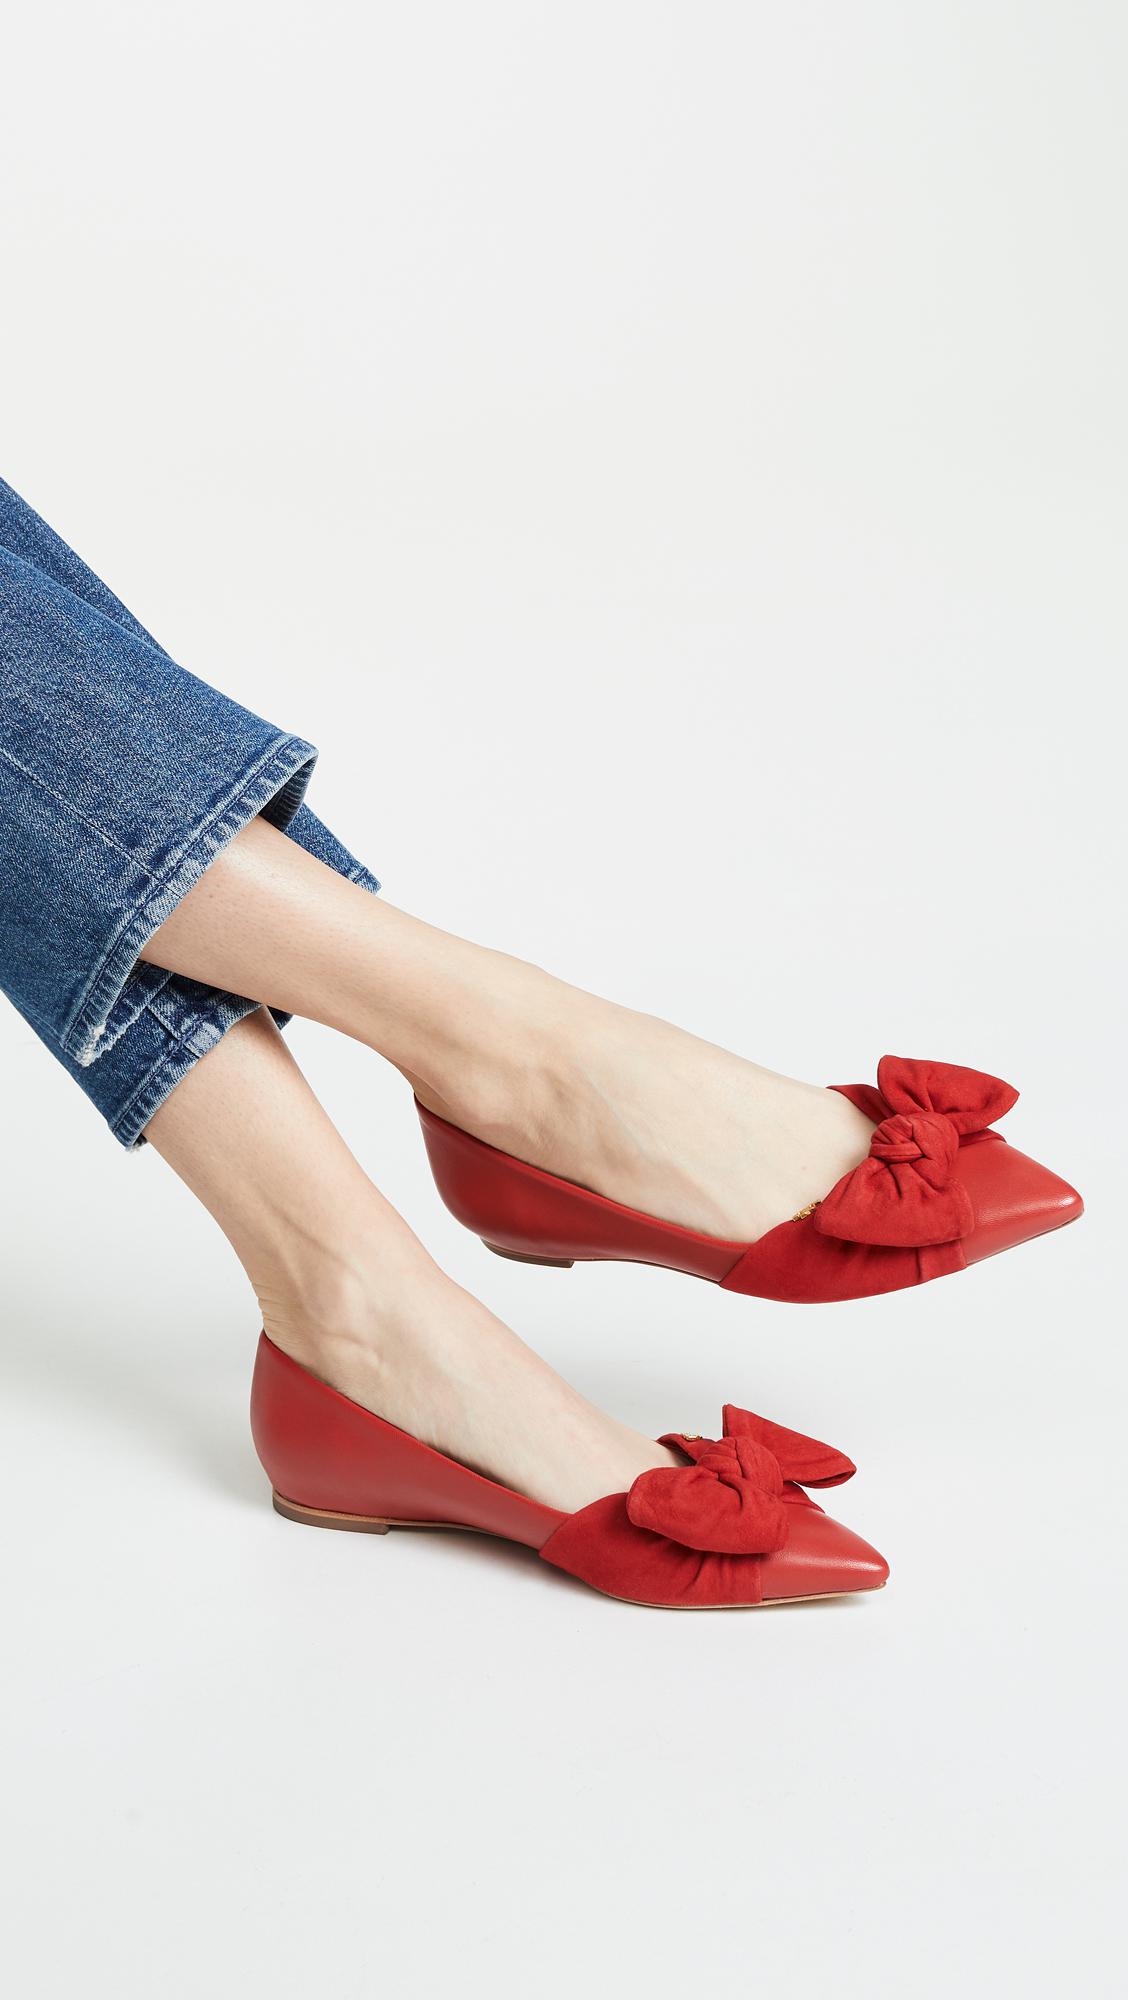 Tory Burch Eleanor Flats in Red - Lyst